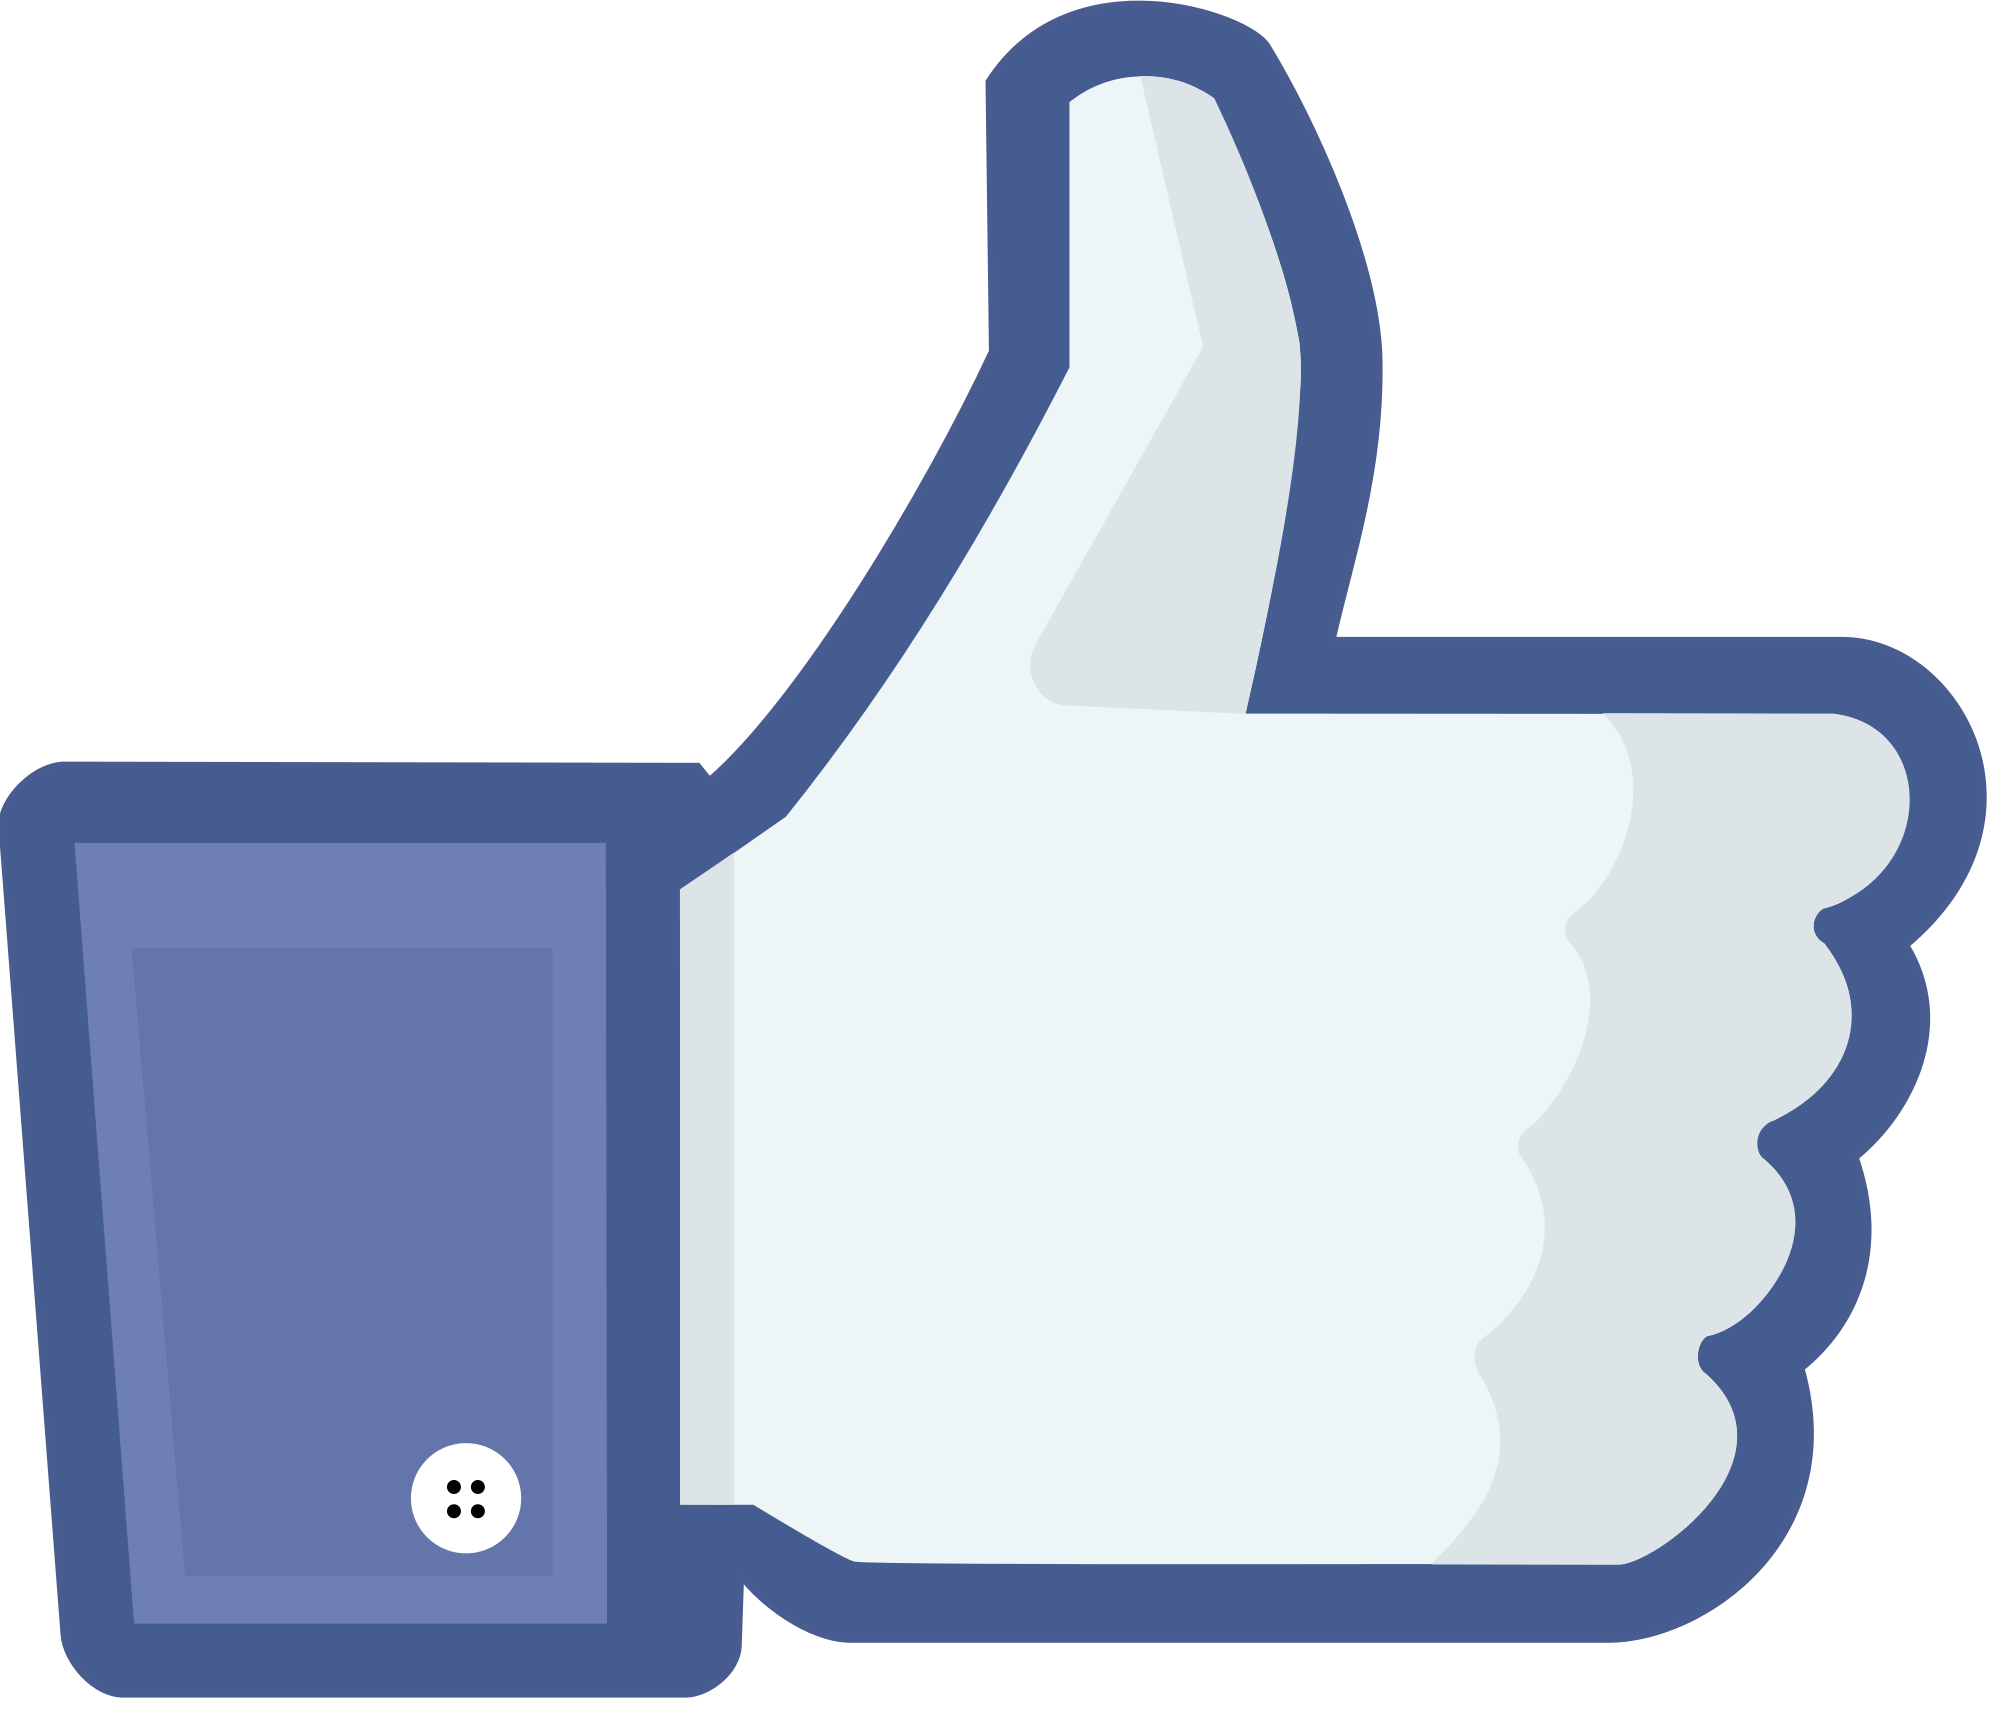 How to Generate More Likes on Your Facebook Business Page